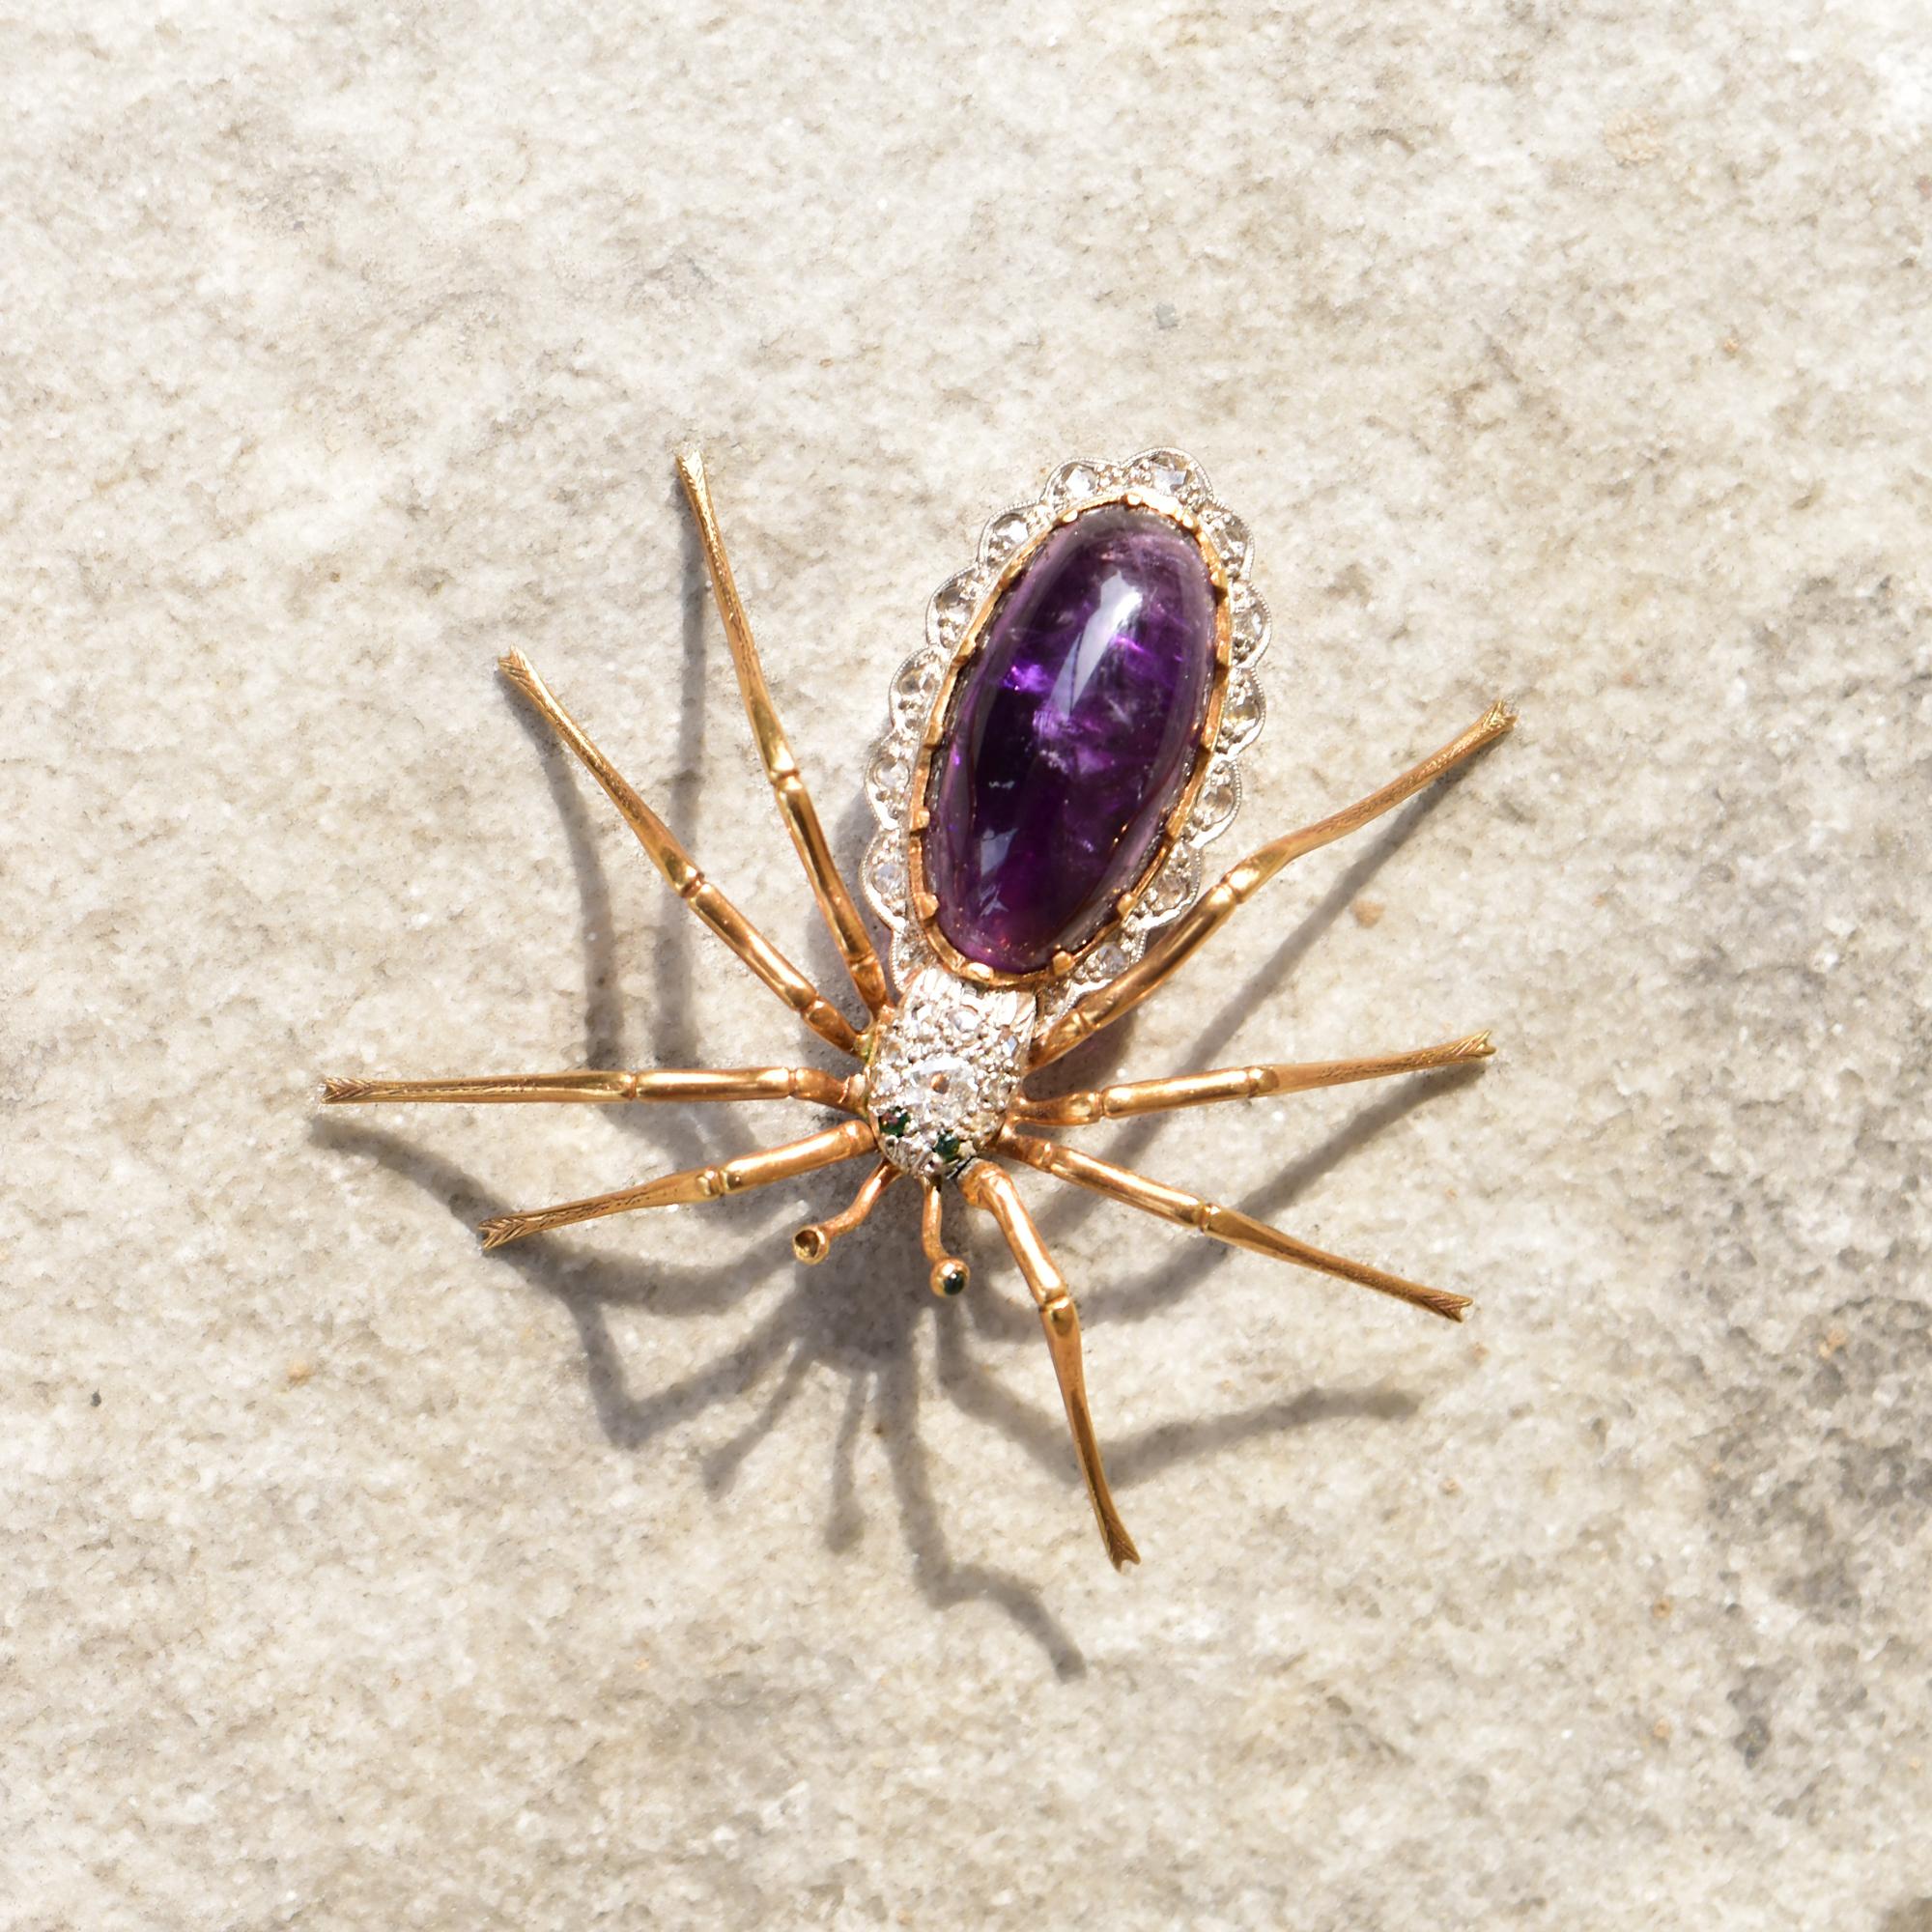 An incredible 14K diamond encrusted amethyst spider brooch with green emerald accents. Features a large yellow gold spider figure with scalloped white gold decoration and large purple amethyst cabochon set in the abdomen. The head of spider is white